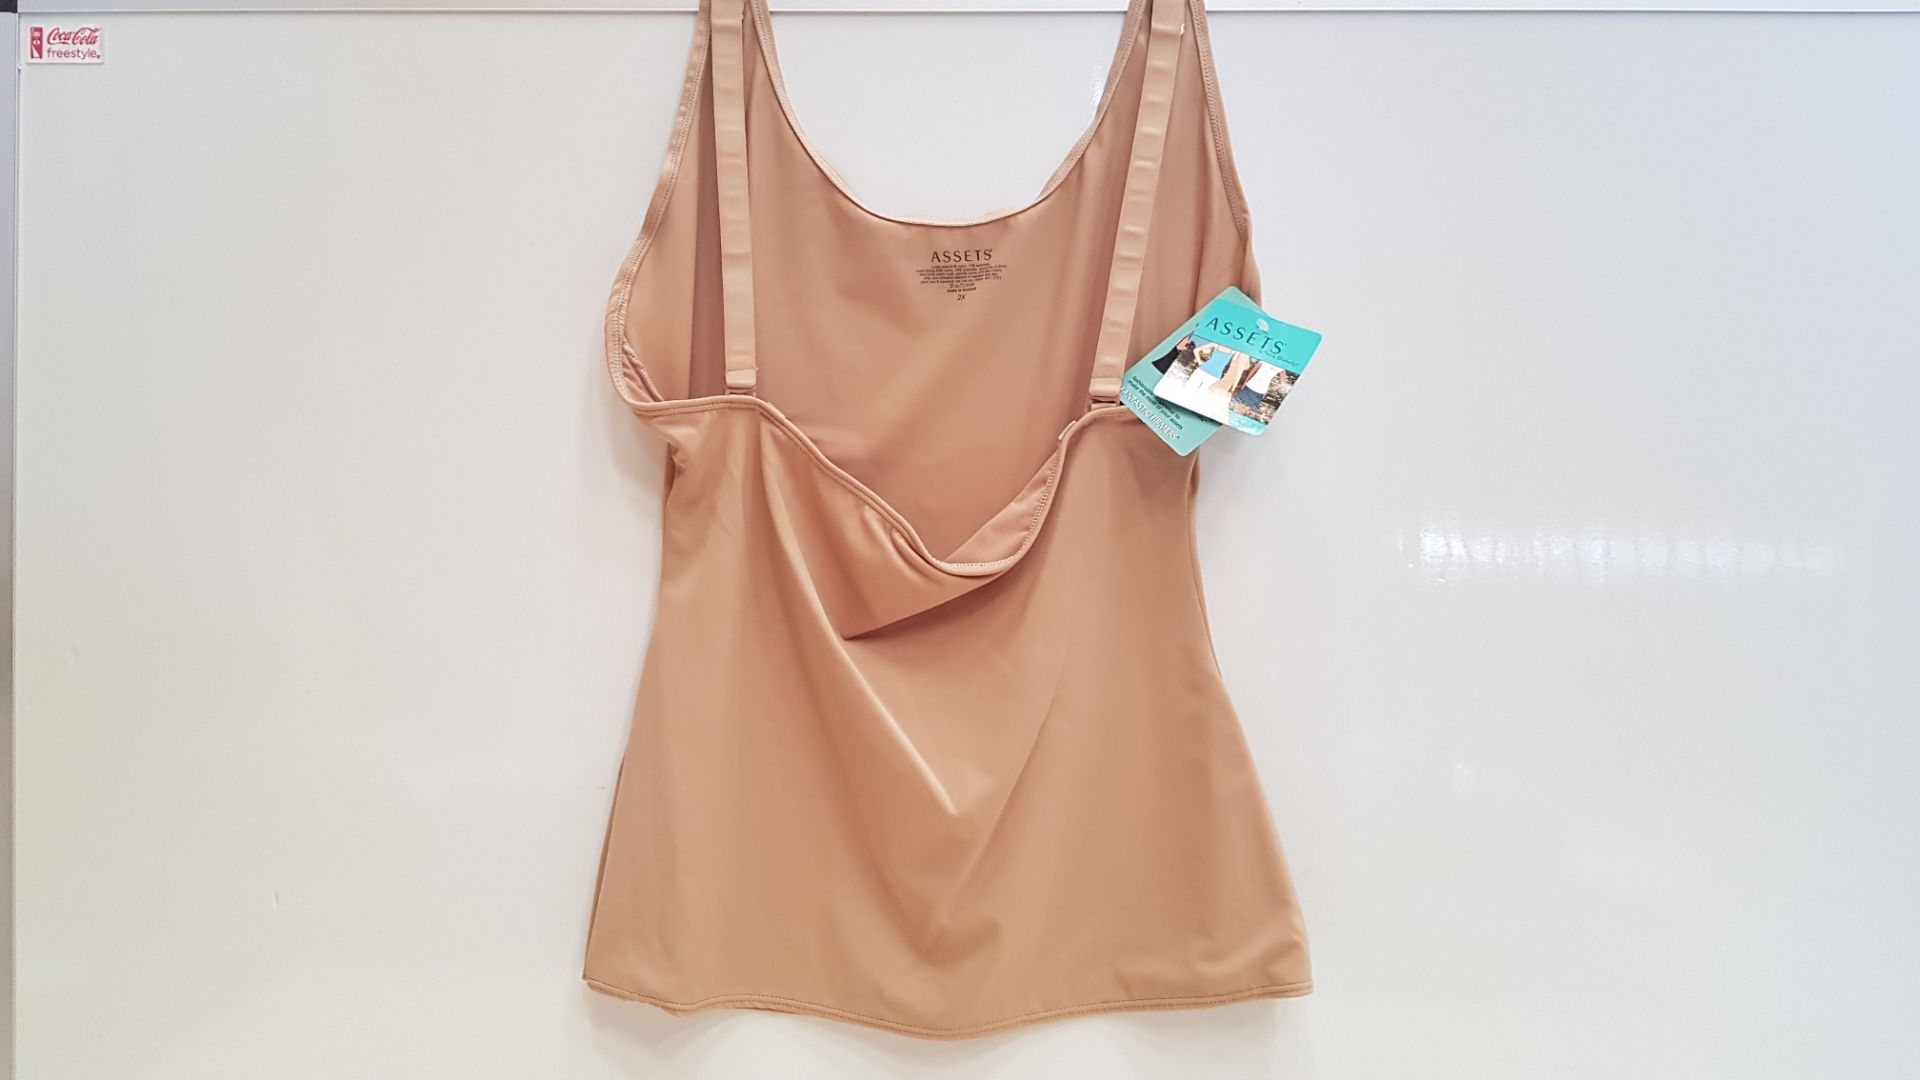 48 X BRAND NEW SPANX OPEN BUST CAMI IN NUDE SIZE 2X